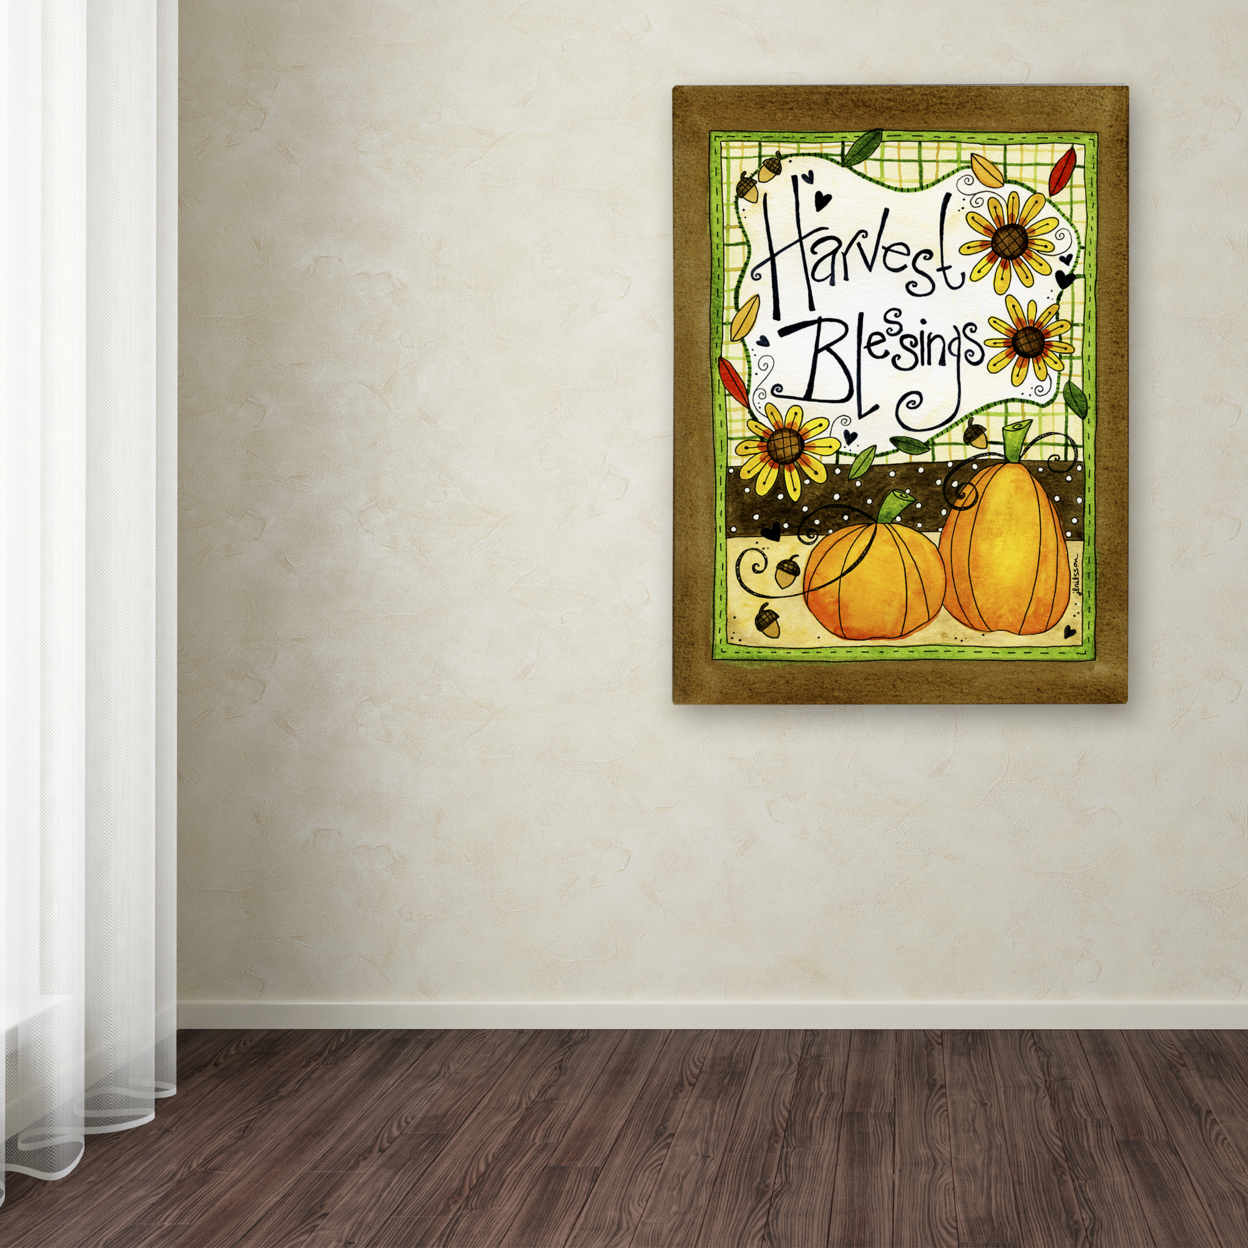 Jennifer Nilsson 'Harvest Blessings' Canvas Wall Art 35 X 47 Inches